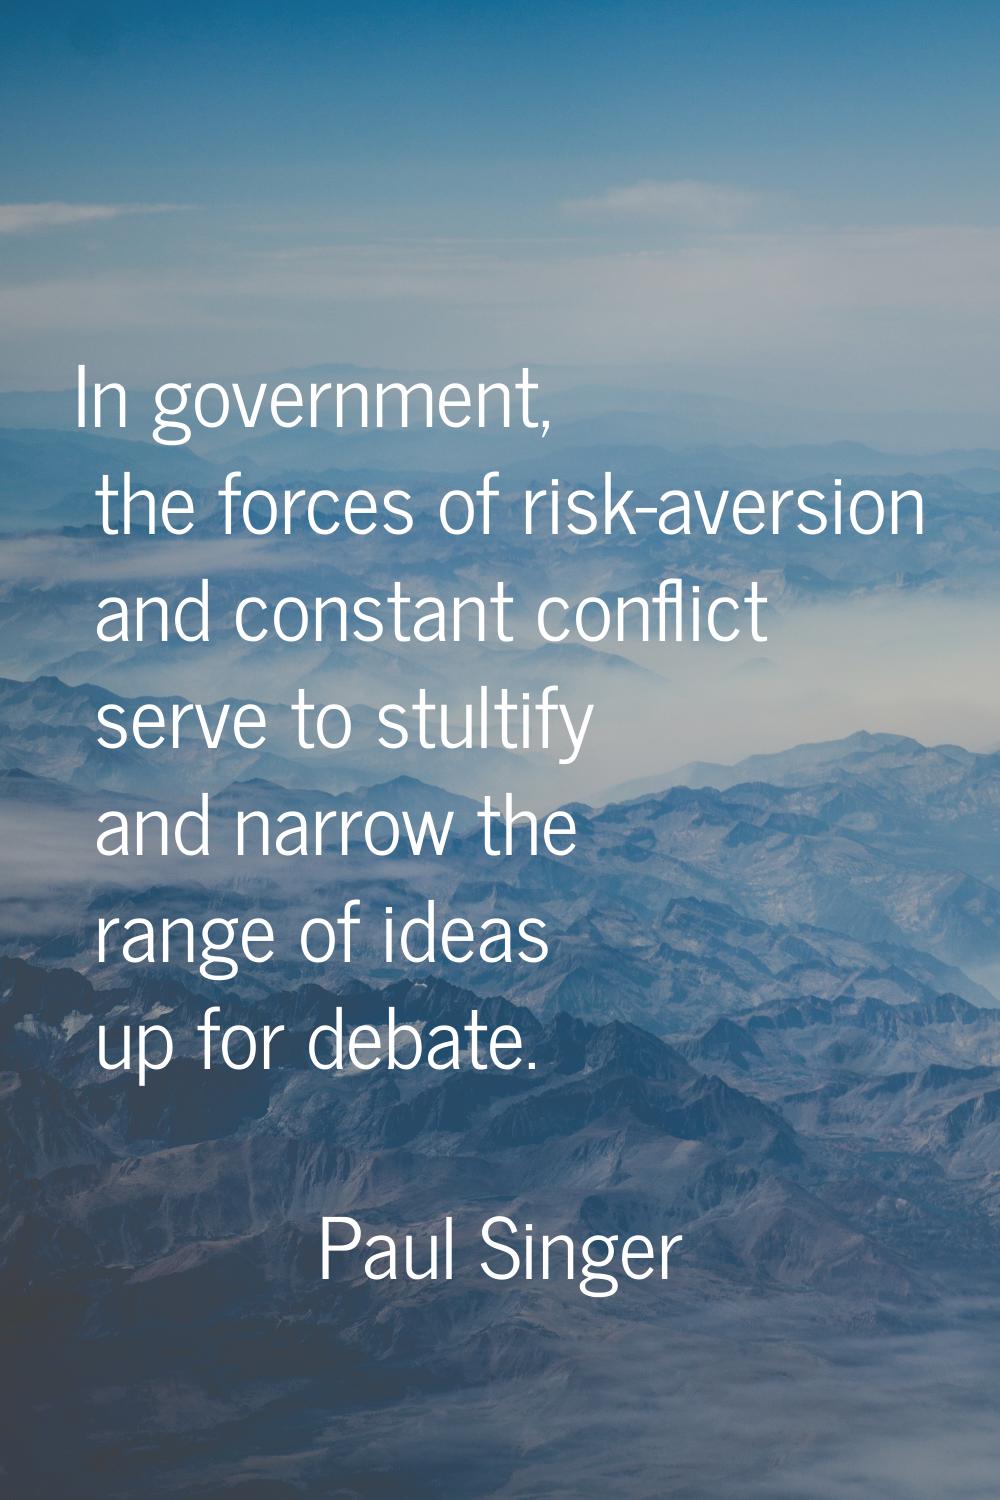 In government, the forces of risk-aversion and constant conflict serve to stultify and narrow the r